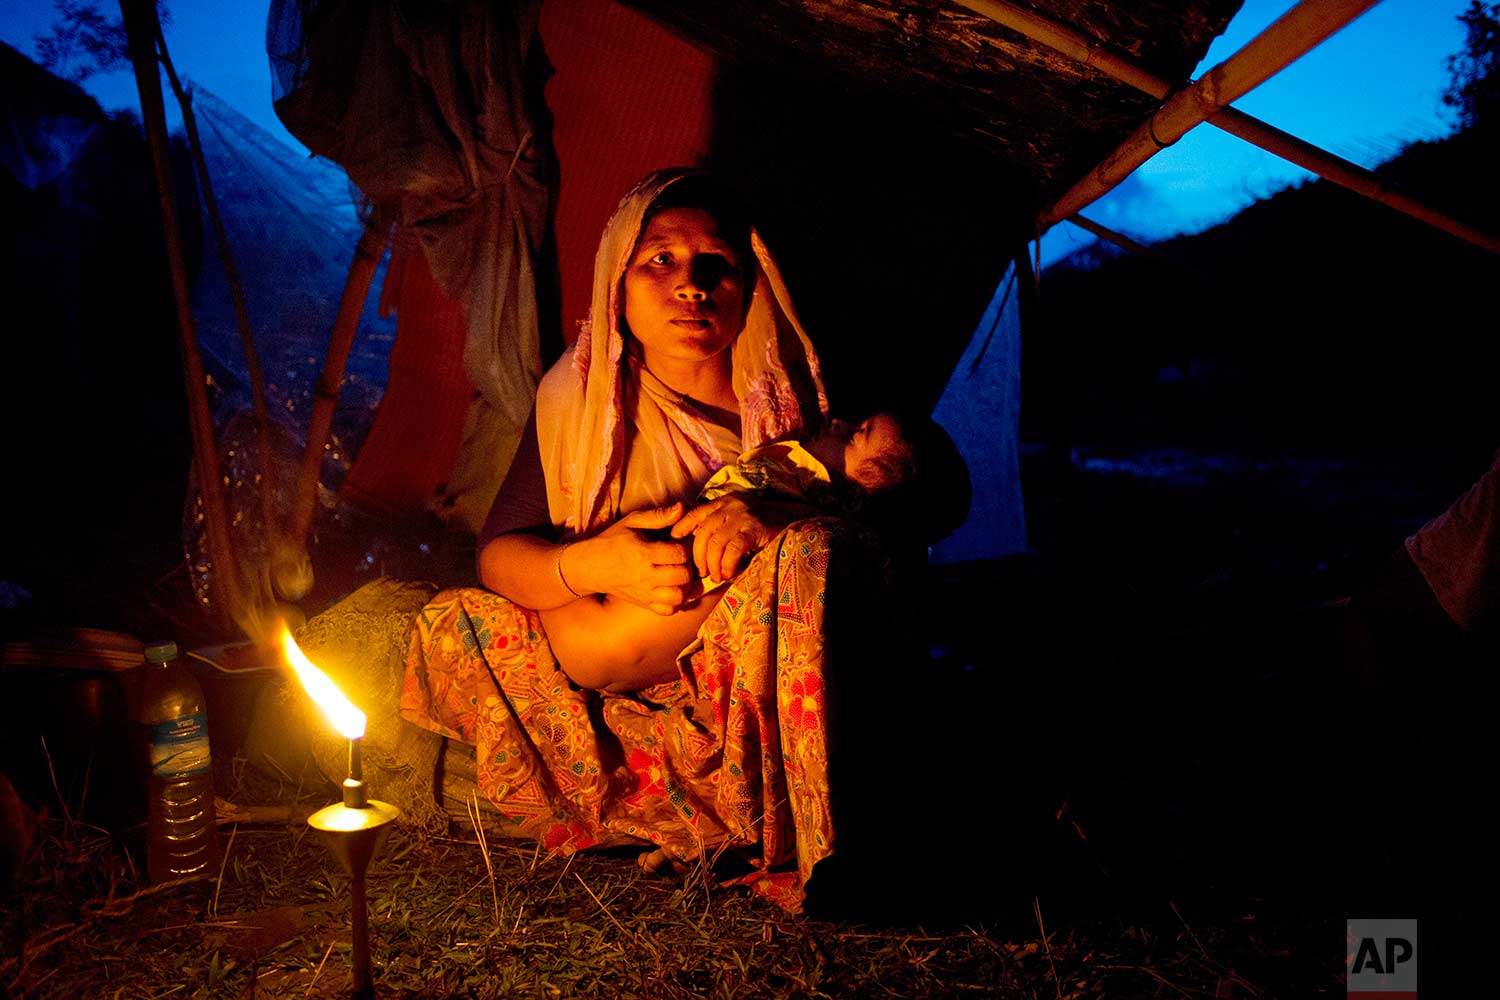  A Rohingya ethnic minority woman cradles her child at a temporary makeshift camp after crossing over from Myanmar into the Bangladesh side of the border, near Cox's Bazar's Gundum area, Saturday, Sept. 2, 2017. U.N. spokesman Stephane Dujarric told 